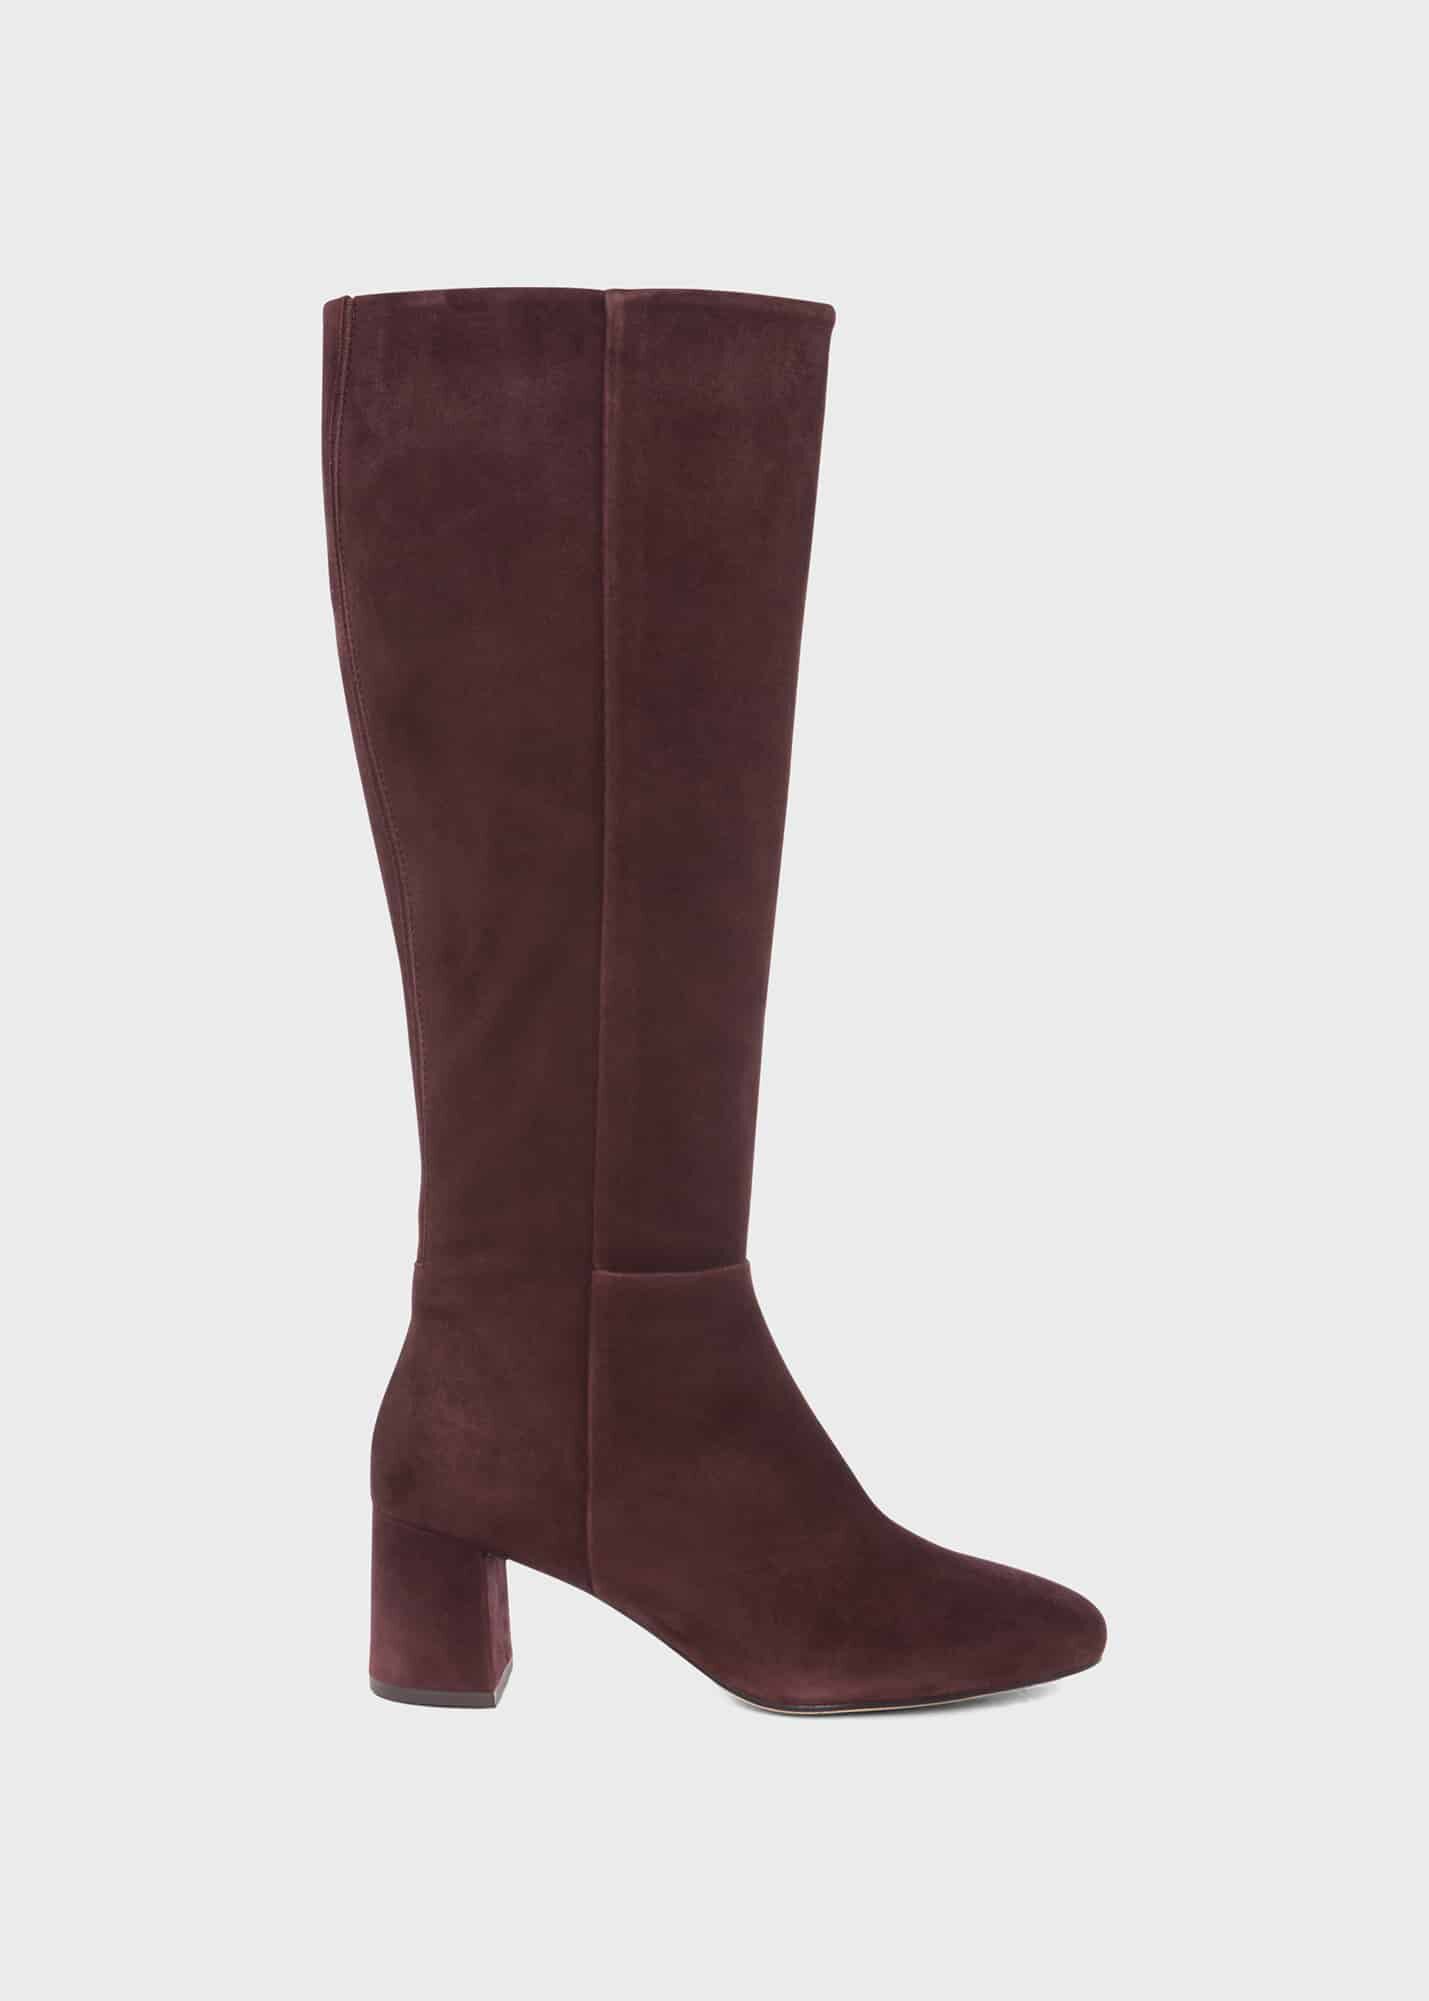 Women's Boots | Ankle, Chelsea & Knee High Boots | Hobbs London |